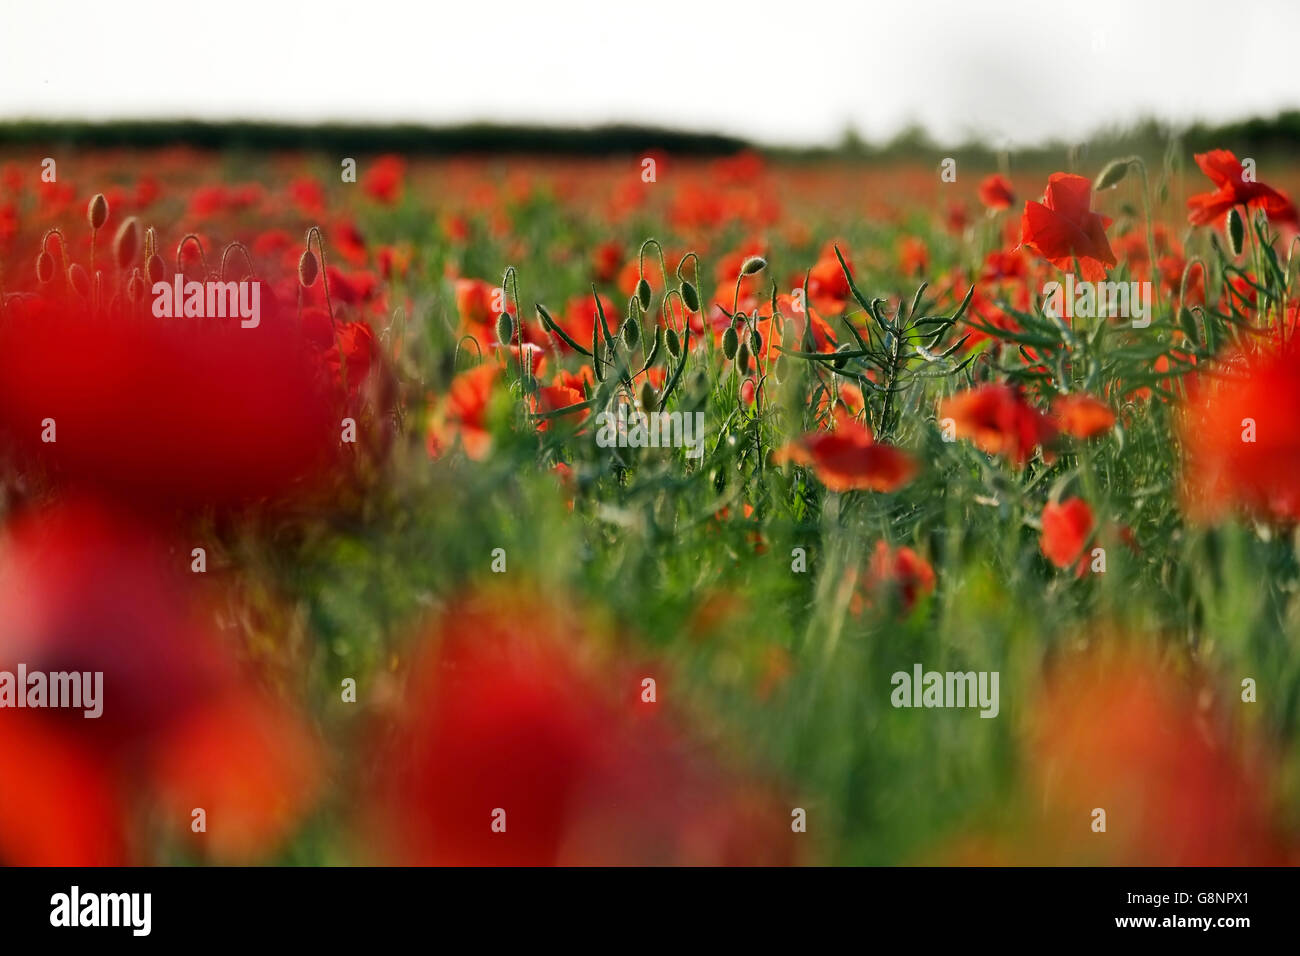 Field or meadow of poppies in English countryside in a landscape format Stock Photo